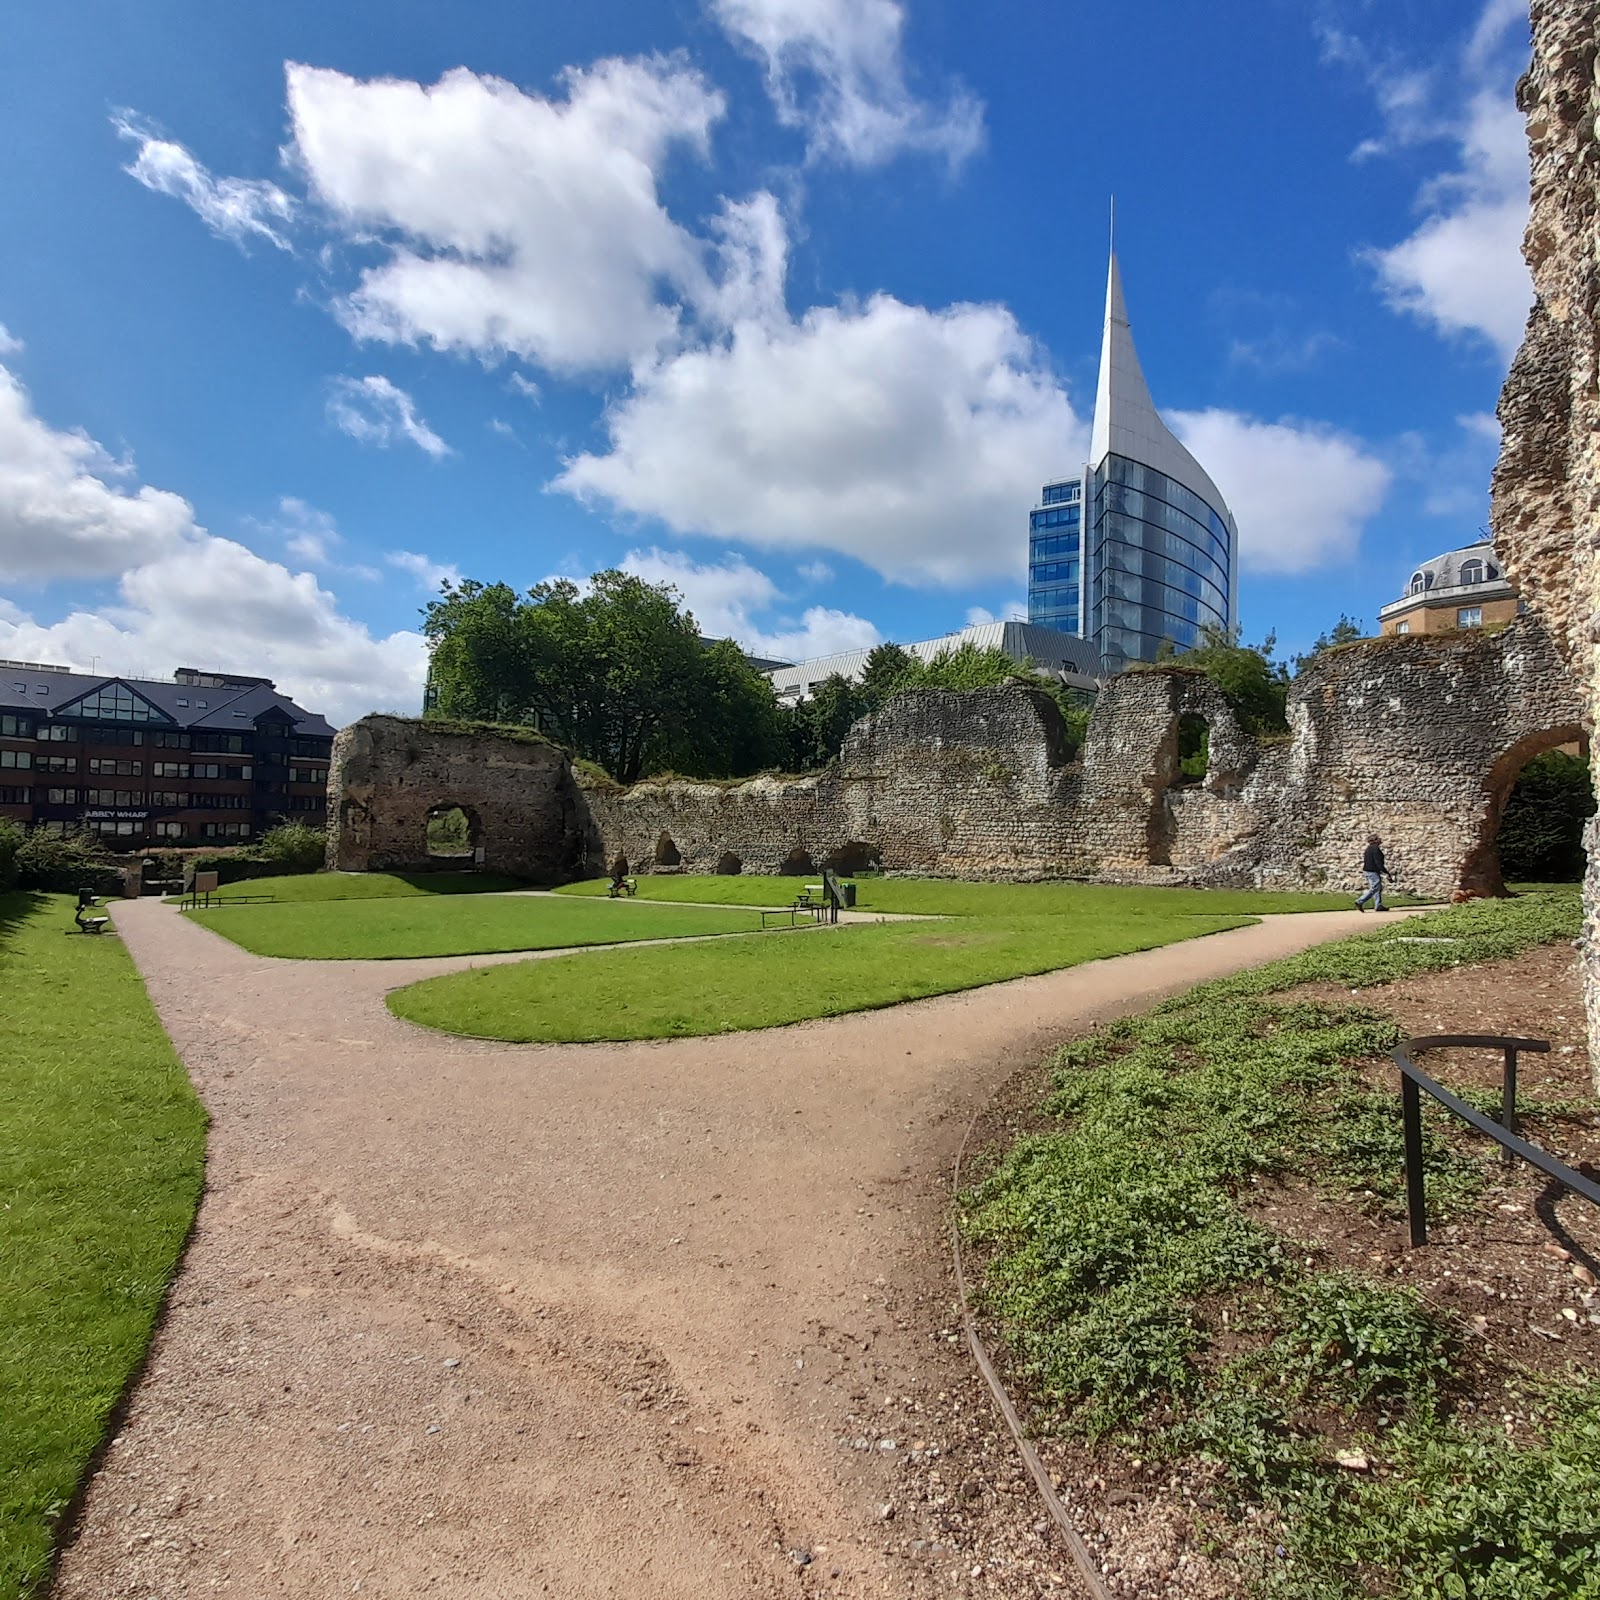 https://whatremovals.co.uk/wp-content/uploads/2022/02/Reading Abbey Ruins-300x300.jpeg